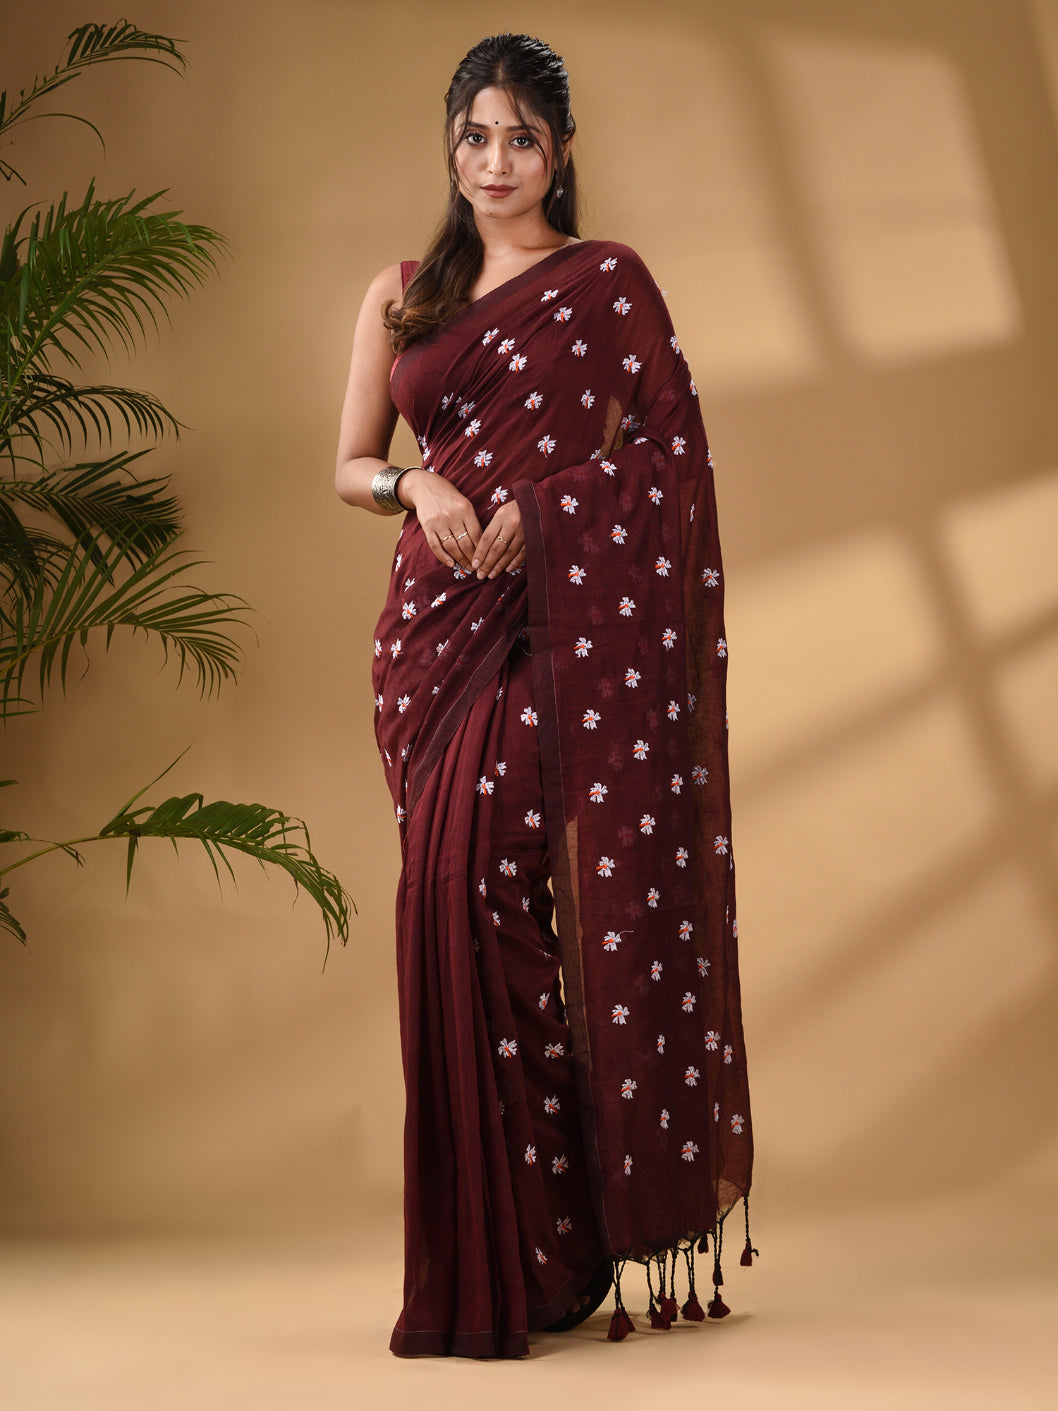 Maroon Cotton Handwoven Soft Saree With Floral Motifs